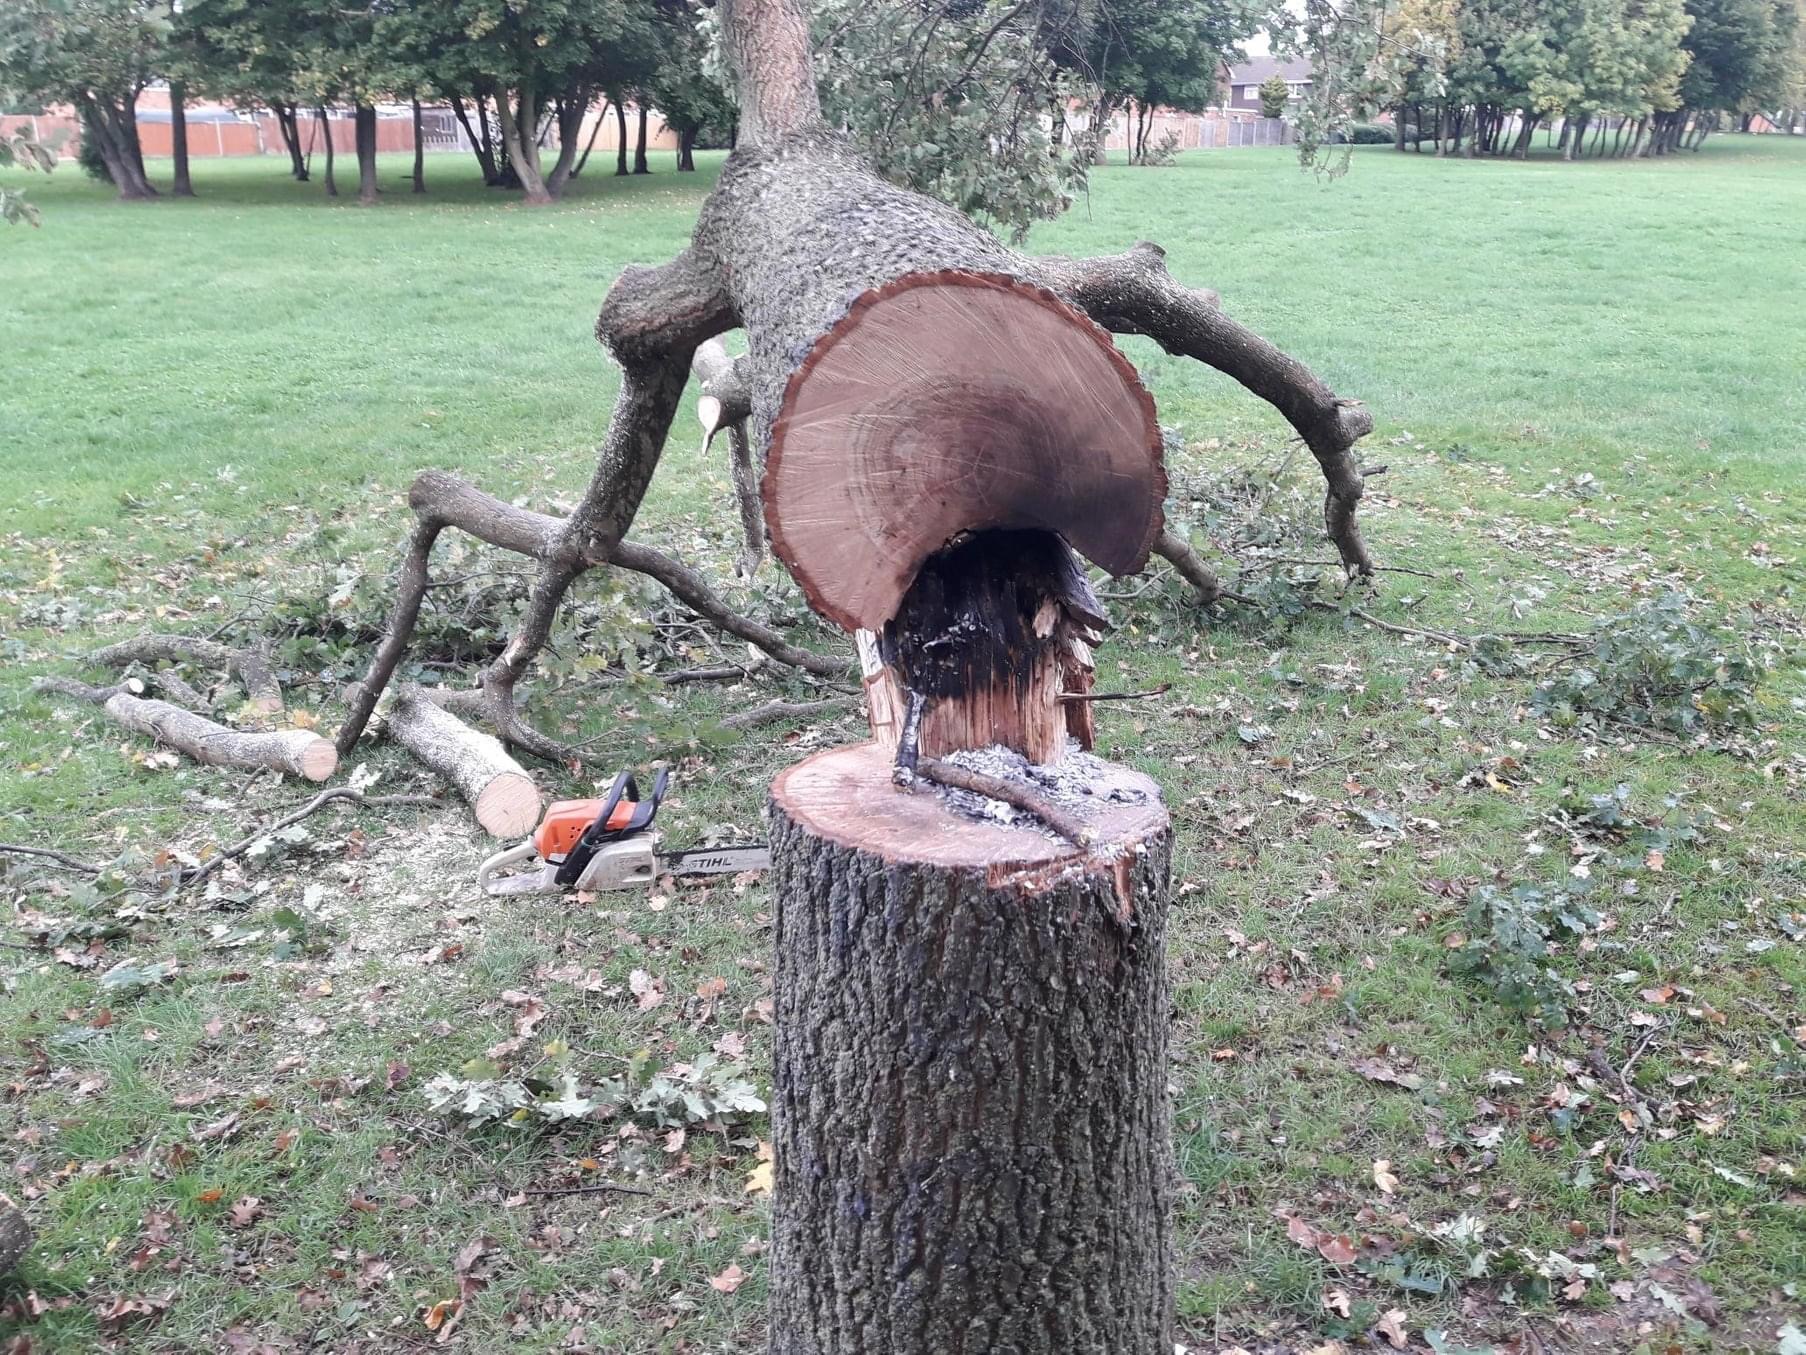 NEWS | Police investigate incident where trees were cut down by youths in Hereford